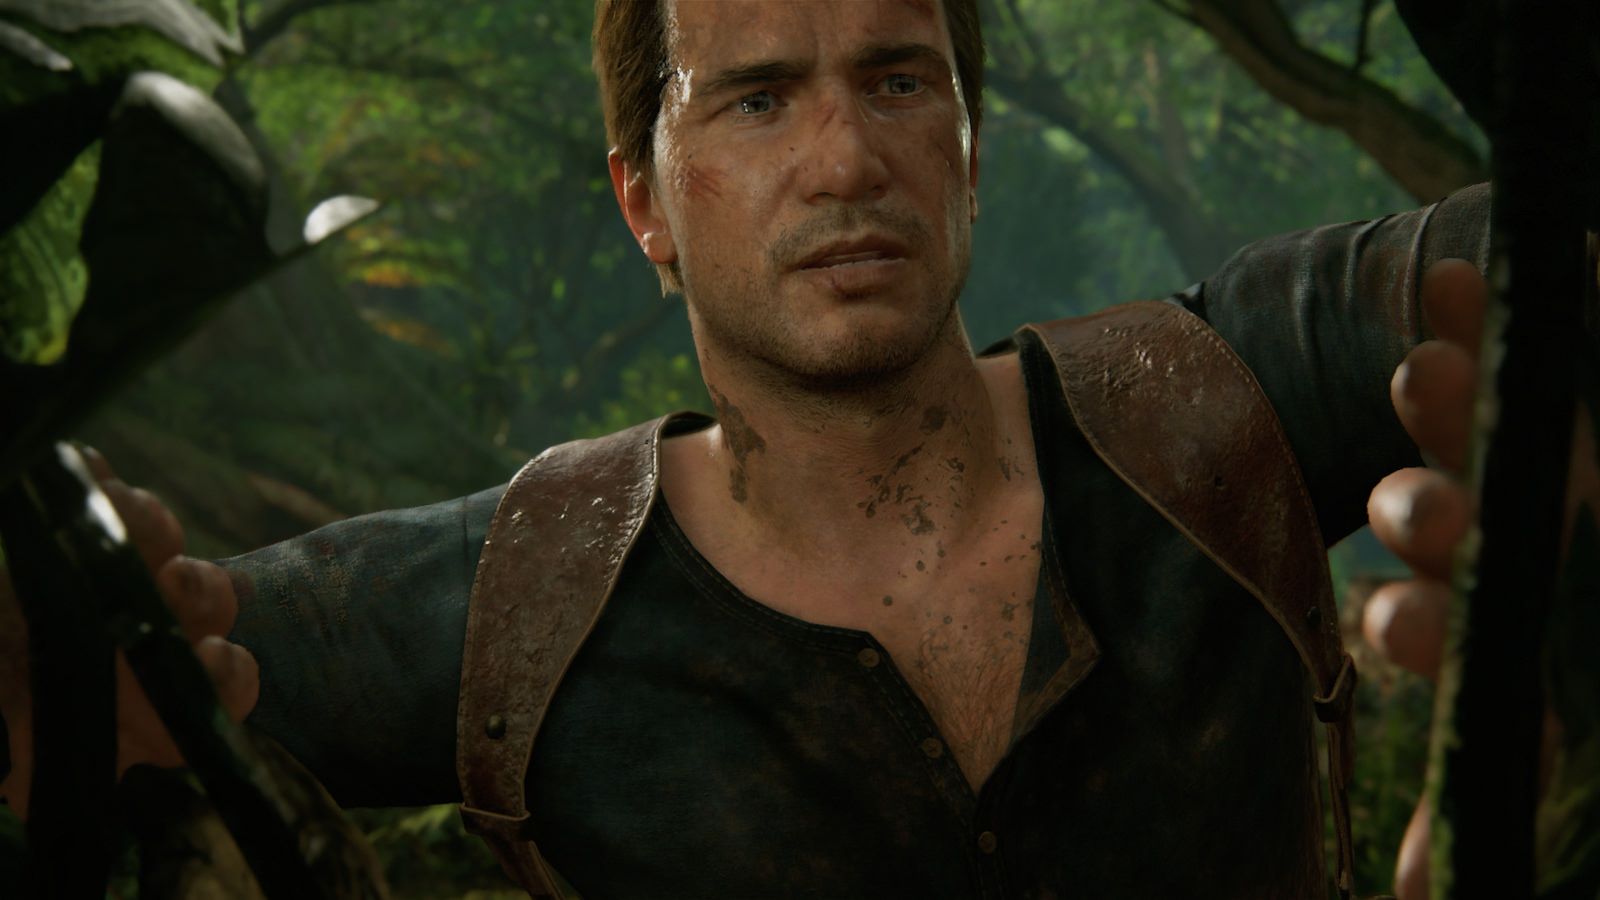 Uncharted 4 is slickly ridiculous action gaming at its best